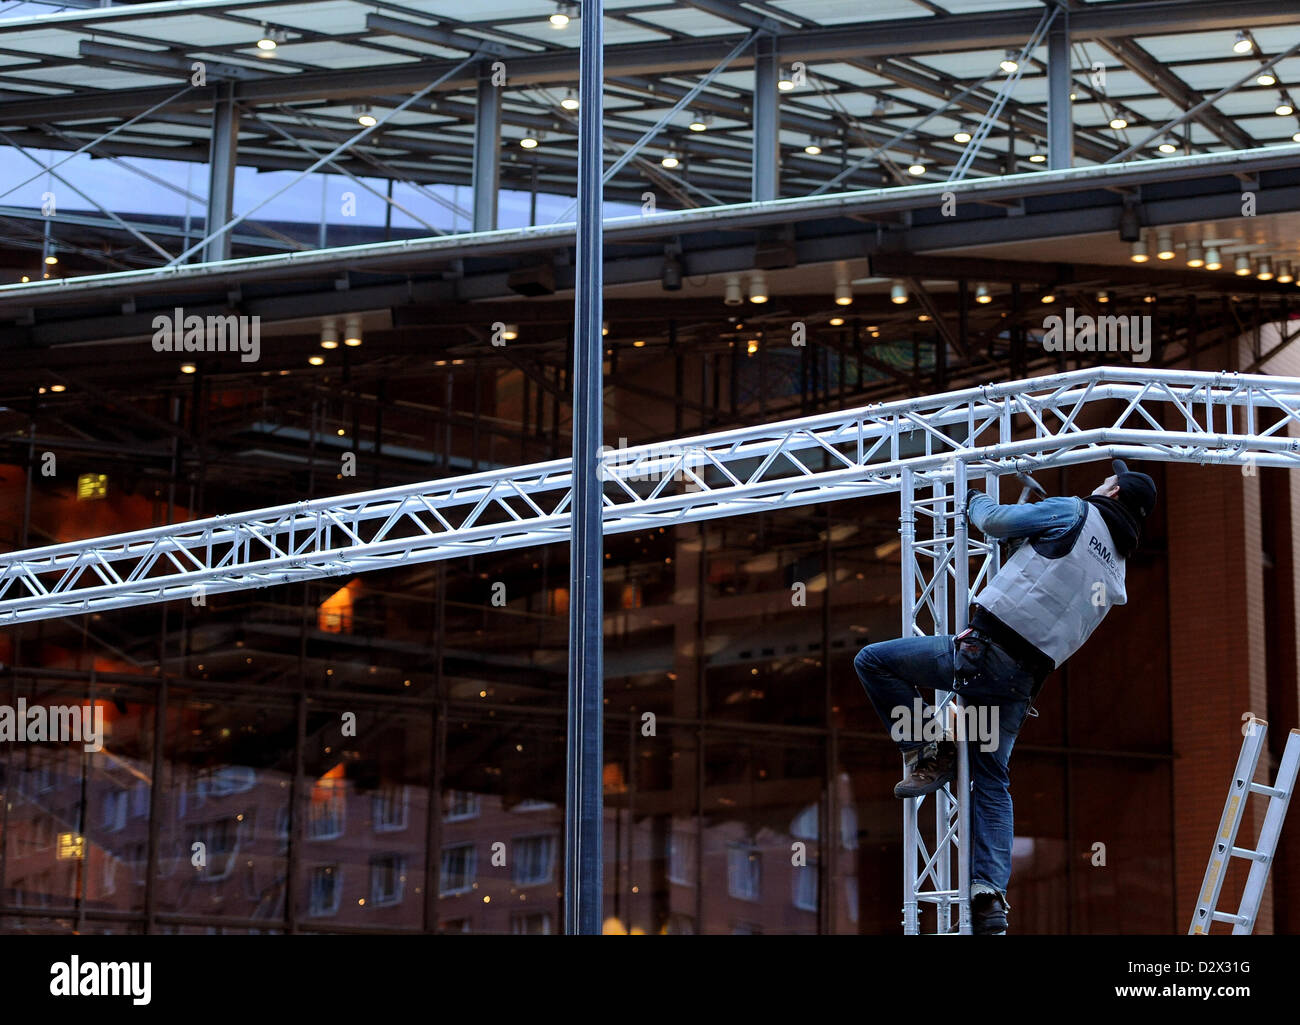 Construction works for the 63rd Berlin Film Fetsival are ongoingin Berlin, Germany, 03 February 2013.  Tickets go on sale for the Berlinale film festival on 04 February 2013. Photo: BRITTA PEDERSEN/Alamy Live News Stock Photo